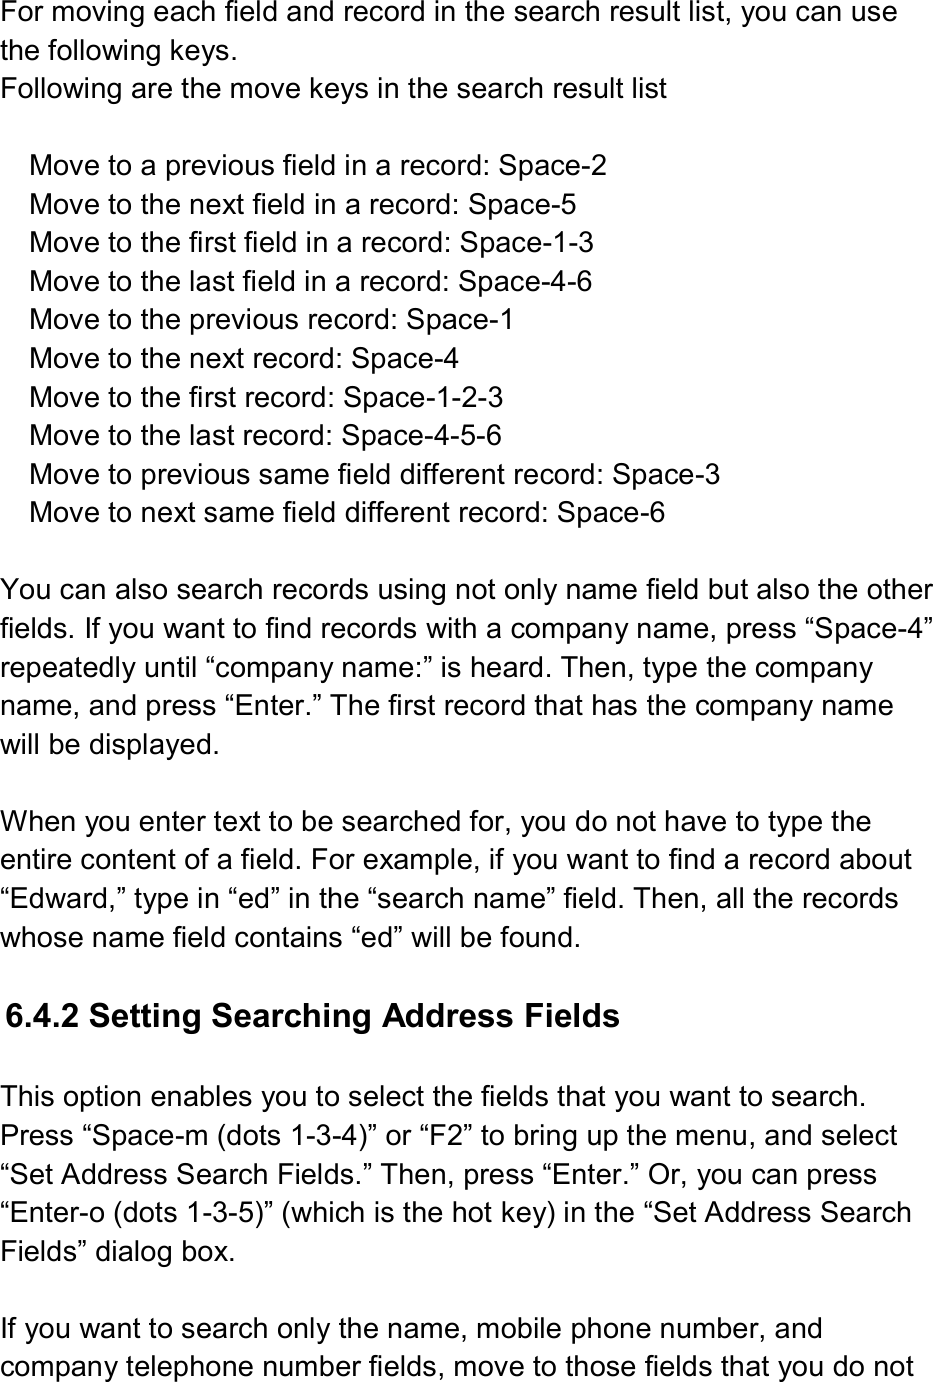  For moving each field and record in the search result list, you can use the following keys. Following are the move keys in the search result list  Move to a previous field in a record: Space-2 Move to the next field in a record: Space-5 Move to the first field in a record: Space-1-3 Move to the last field in a record: Space-4-6 Move to the previous record: Space-1 Move to the next record: Space-4 Move to the first record: Space-1-2-3 Move to the last record: Space-4-5-6 Move to previous same field different record: Space-3 Move to next same field different record: Space-6  You can also search records using not only name field but also the other fields. If you want to find records with a company name, press “Space-4” repeatedly until “company name:” is heard. Then, type the company name, and press “Enter.” The first record that has the company name will be displayed.  When you enter text to be searched for, you do not have to type the entire content of a field. For example, if you want to find a record about “Edward,” type in “ed” in the “search name” field. Then, all the records whose name field contains “ed” will be found.  6.4.2 Setting Searching Address Fields  This option enables you to select the fields that you want to search. Press “Space-m (dots 1-3-4)” or “F2” to bring up the menu, and select “Set Address Search Fields.” Then, press “Enter.” Or, you can press “Enter-o (dots 1-3-5)” (which is the hot key) in the “Set Address Search Fields” dialog box.  If you want to search only the name, mobile phone number, and company telephone number fields, move to those fields that you do not 